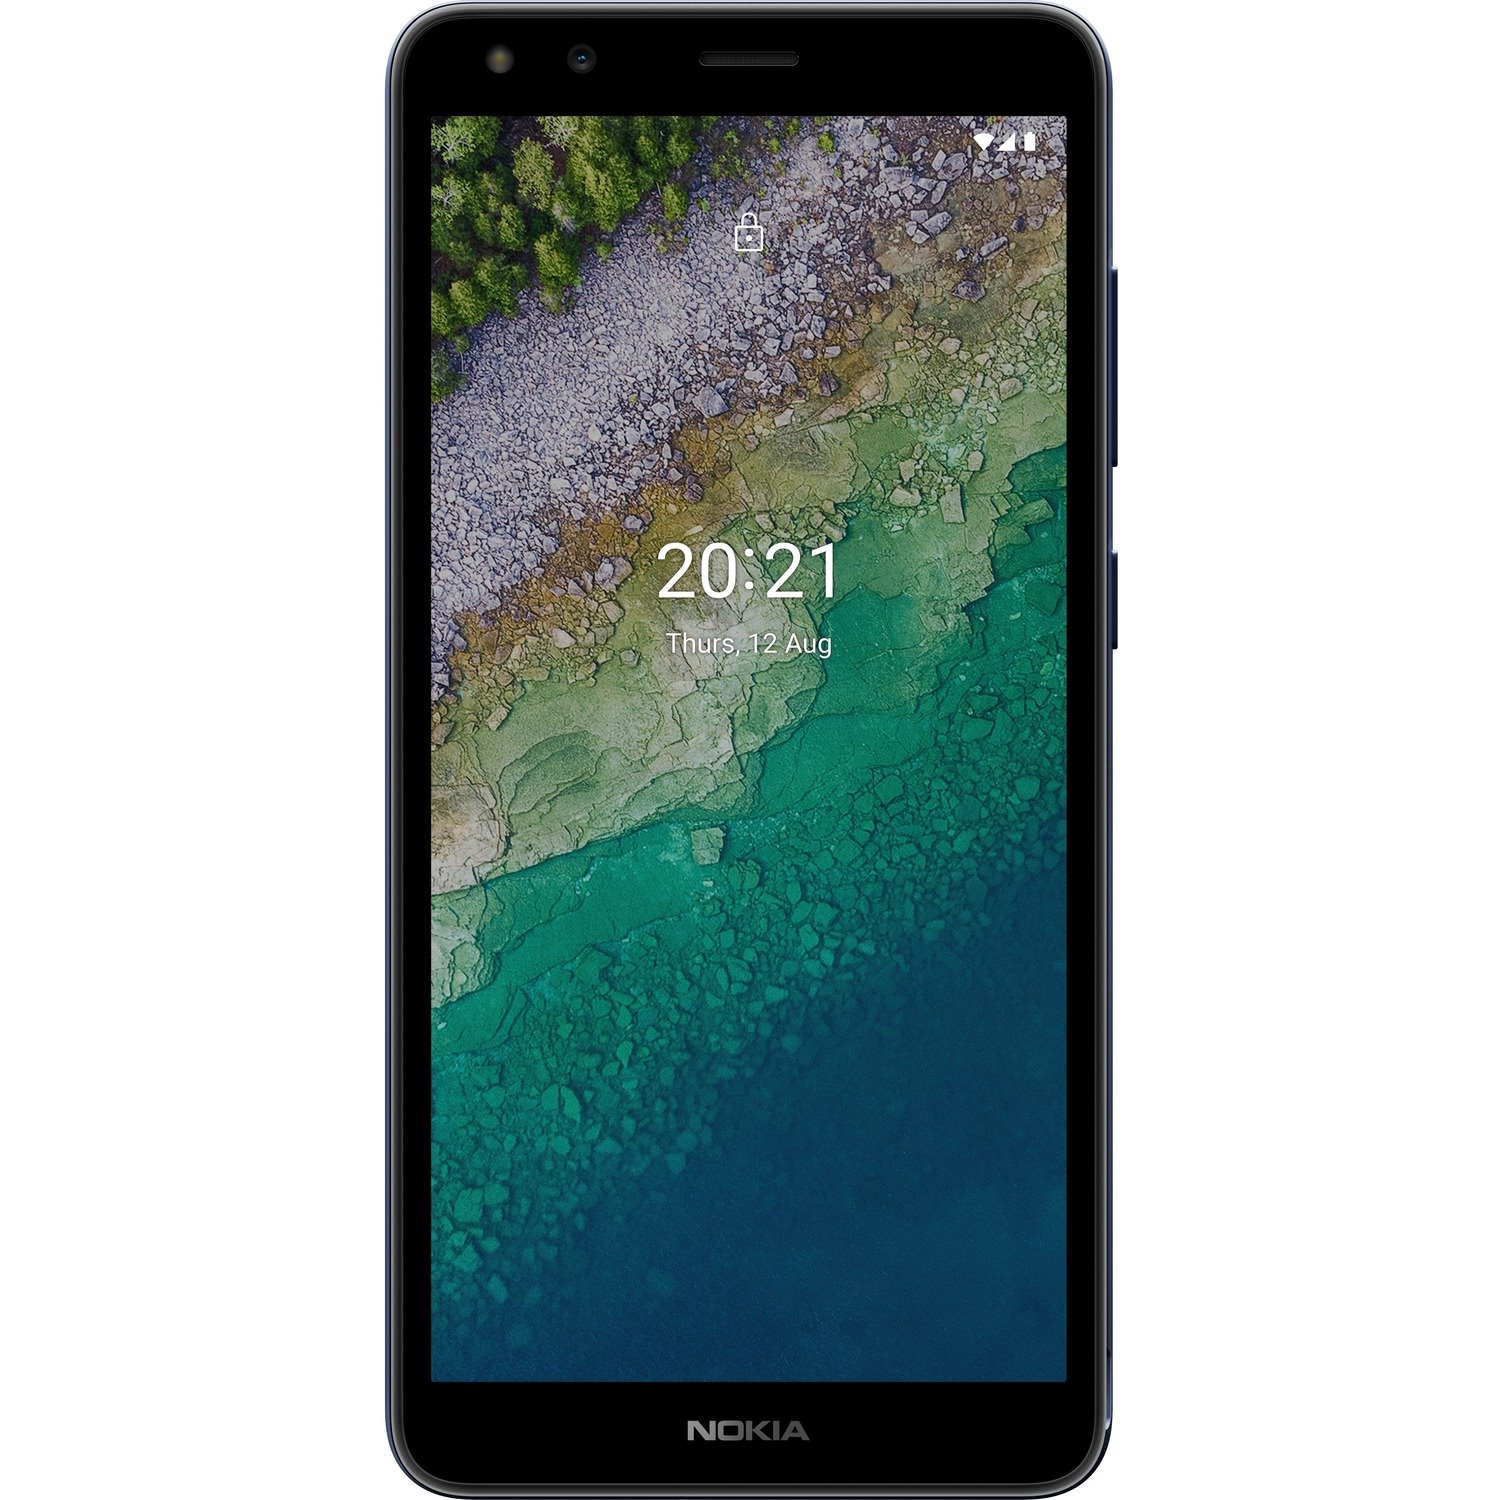 Nokia C01 Plus 16 GB Smartphone - 5.5" LCD HD+ 720 x 1440 - Octa-core (Cortex A55Quad-core (4 Core) 1.60 GHz + Cortex A55 Quad-core (4 Core) 1.20 GHz - 2 GB RAM - Android 11 (Go Edition) - 4G - Blue